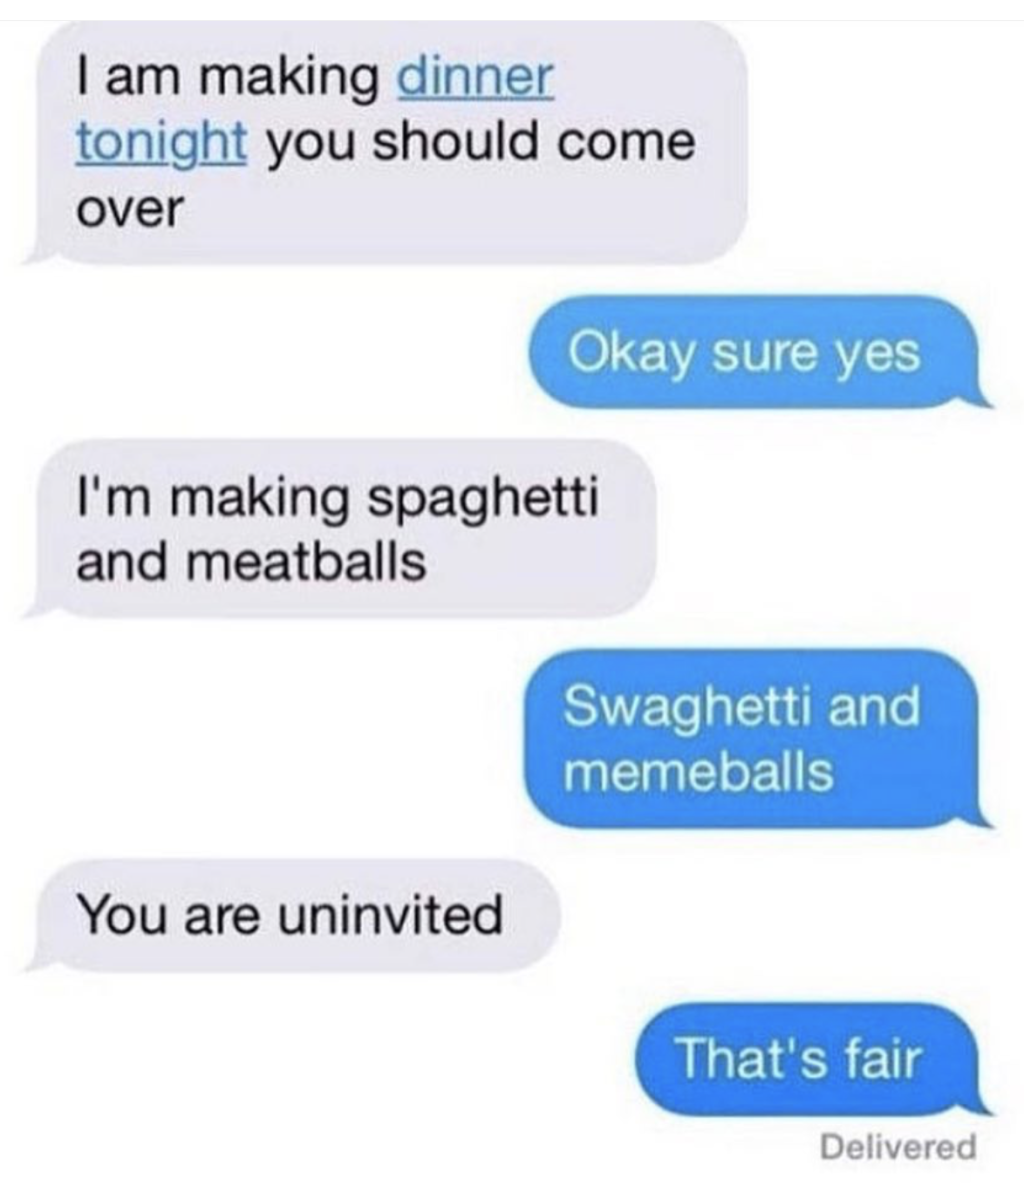 Funny DM exchange of man who wants swags and memes and girl is making spaghetti and meatballs.